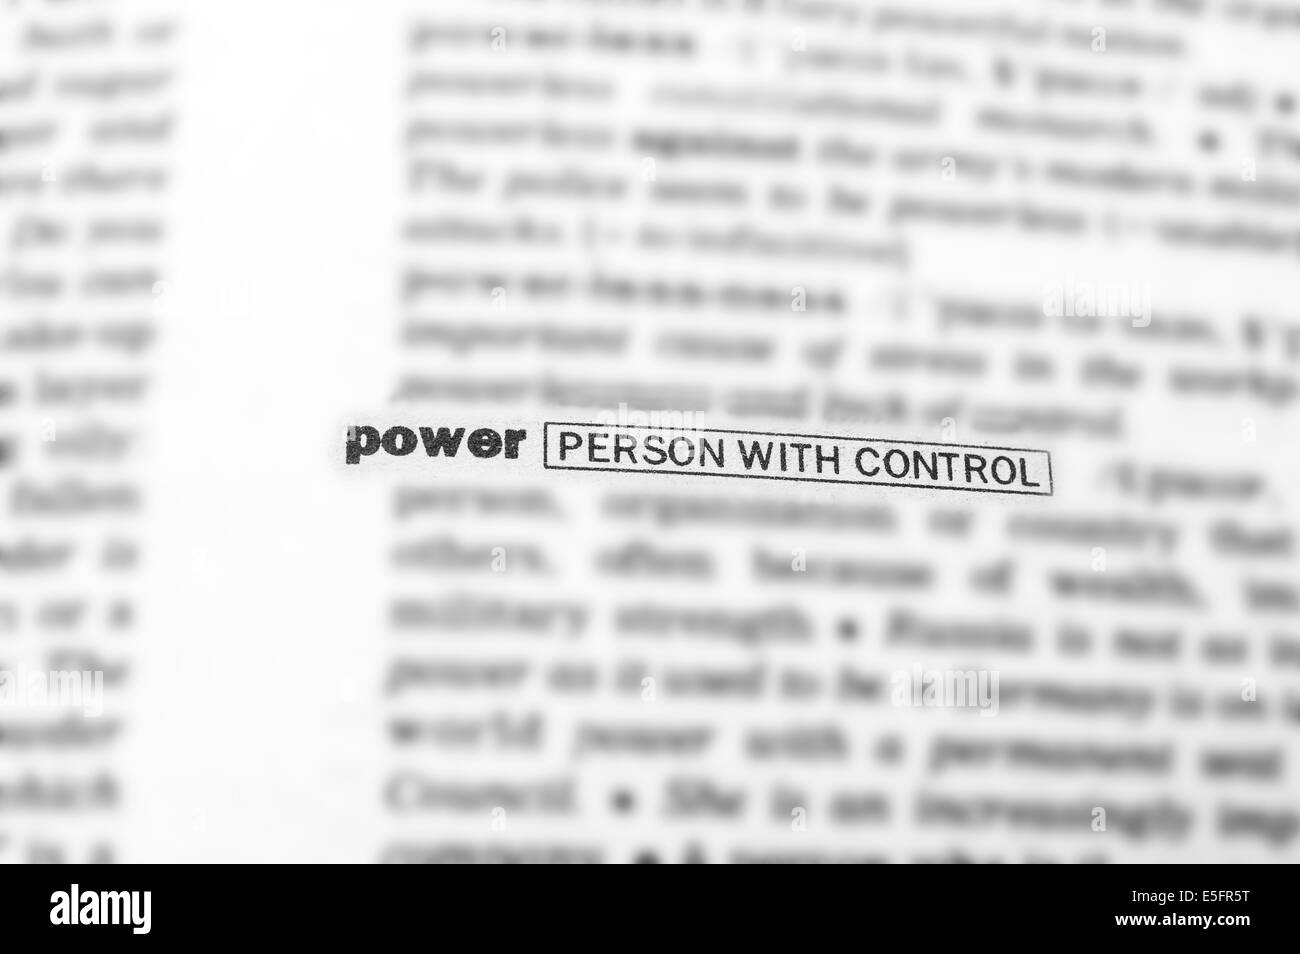 Blurred text in dictionary with focus on POWER. Stock Photo